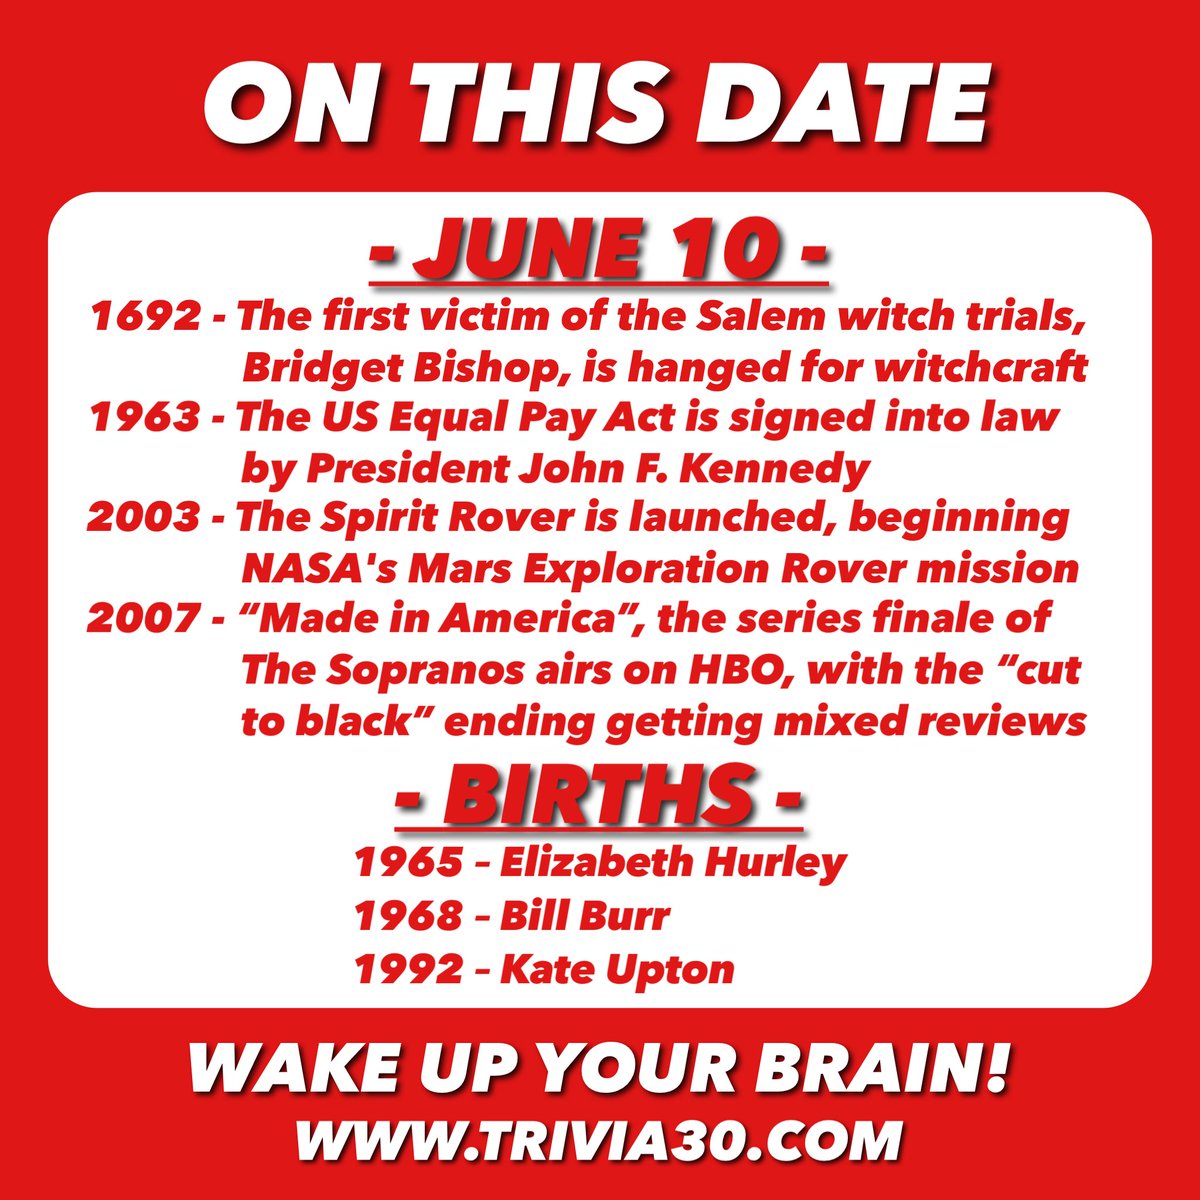 Your OTD trivia for 6/10... Join us for trivia tonight at Dicks Wings, and have a great Saturday! #TRIVIA30 #WakeUpYourBrain #OnThisDay #SalemWitchTrials #JFK #equalpay #NASA #SpiritRover #Mars #TheSopranos #HBO #ElizabethHurley #BillBurr #KateUpton